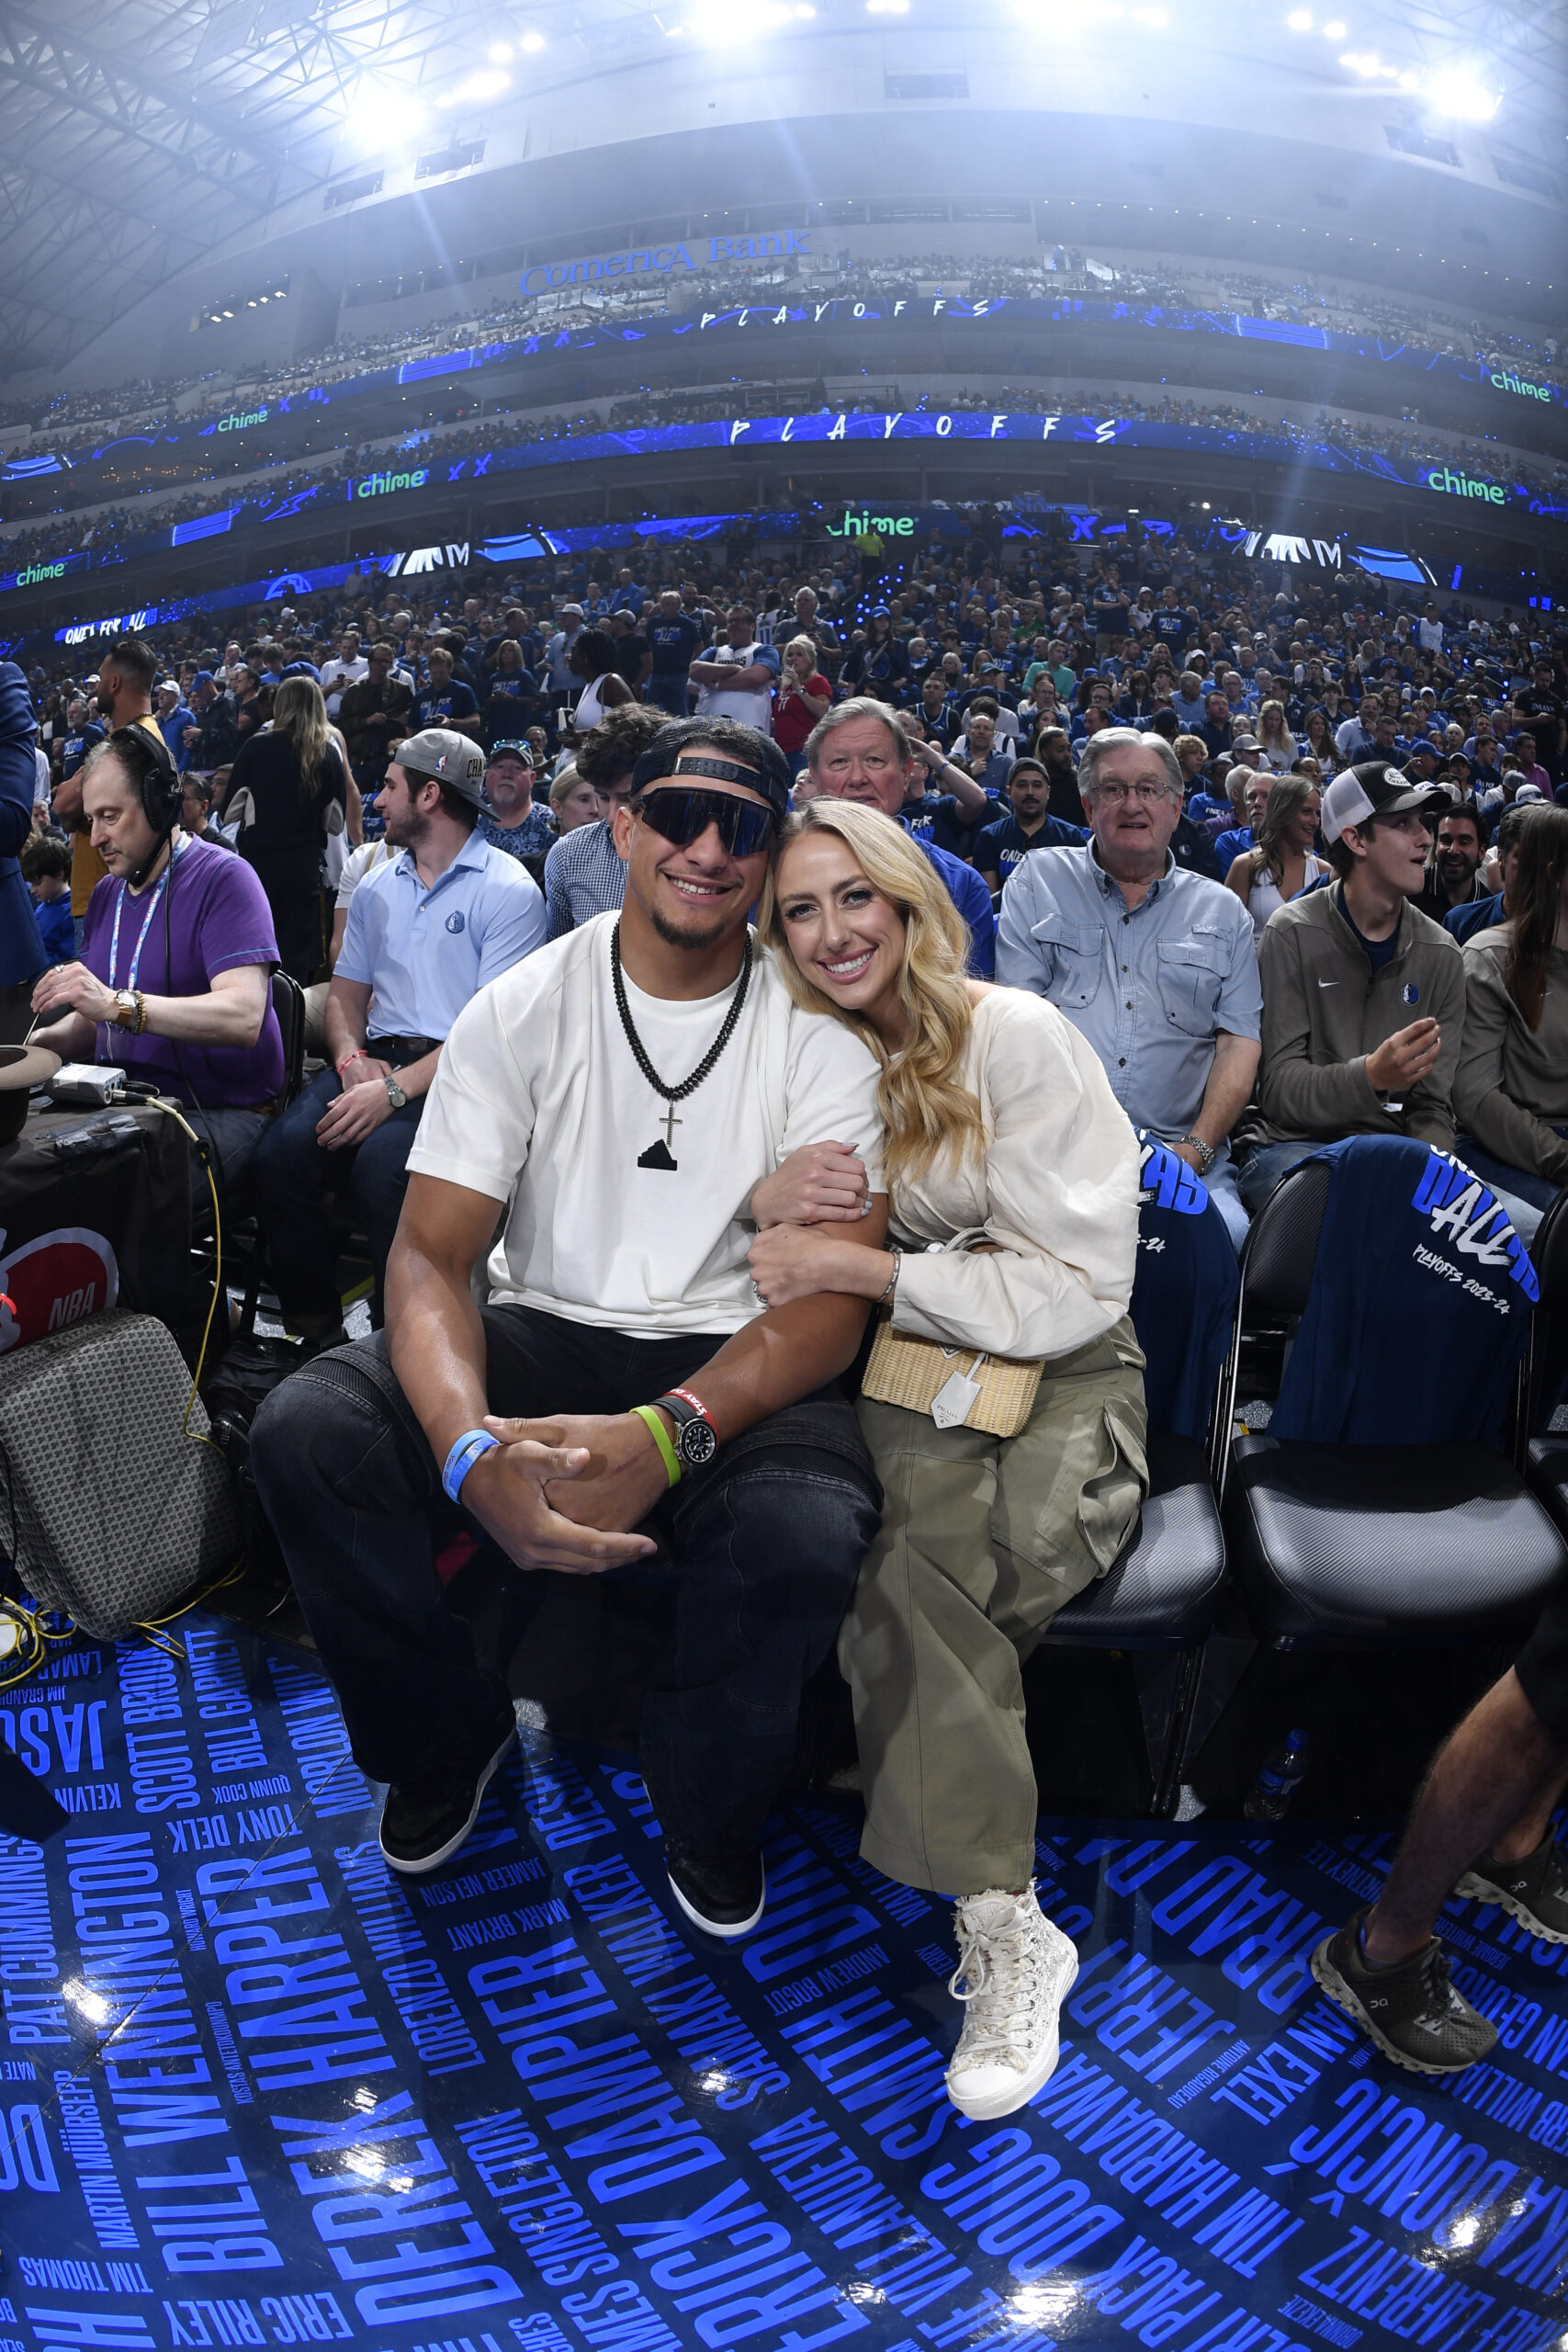 Kansas City Chiefs star quarterback Patrick Mahomes appeared courtside with his wife Brittany at the Dallas Mavericks Game 3 matchup with the Oklahoma City Thunder